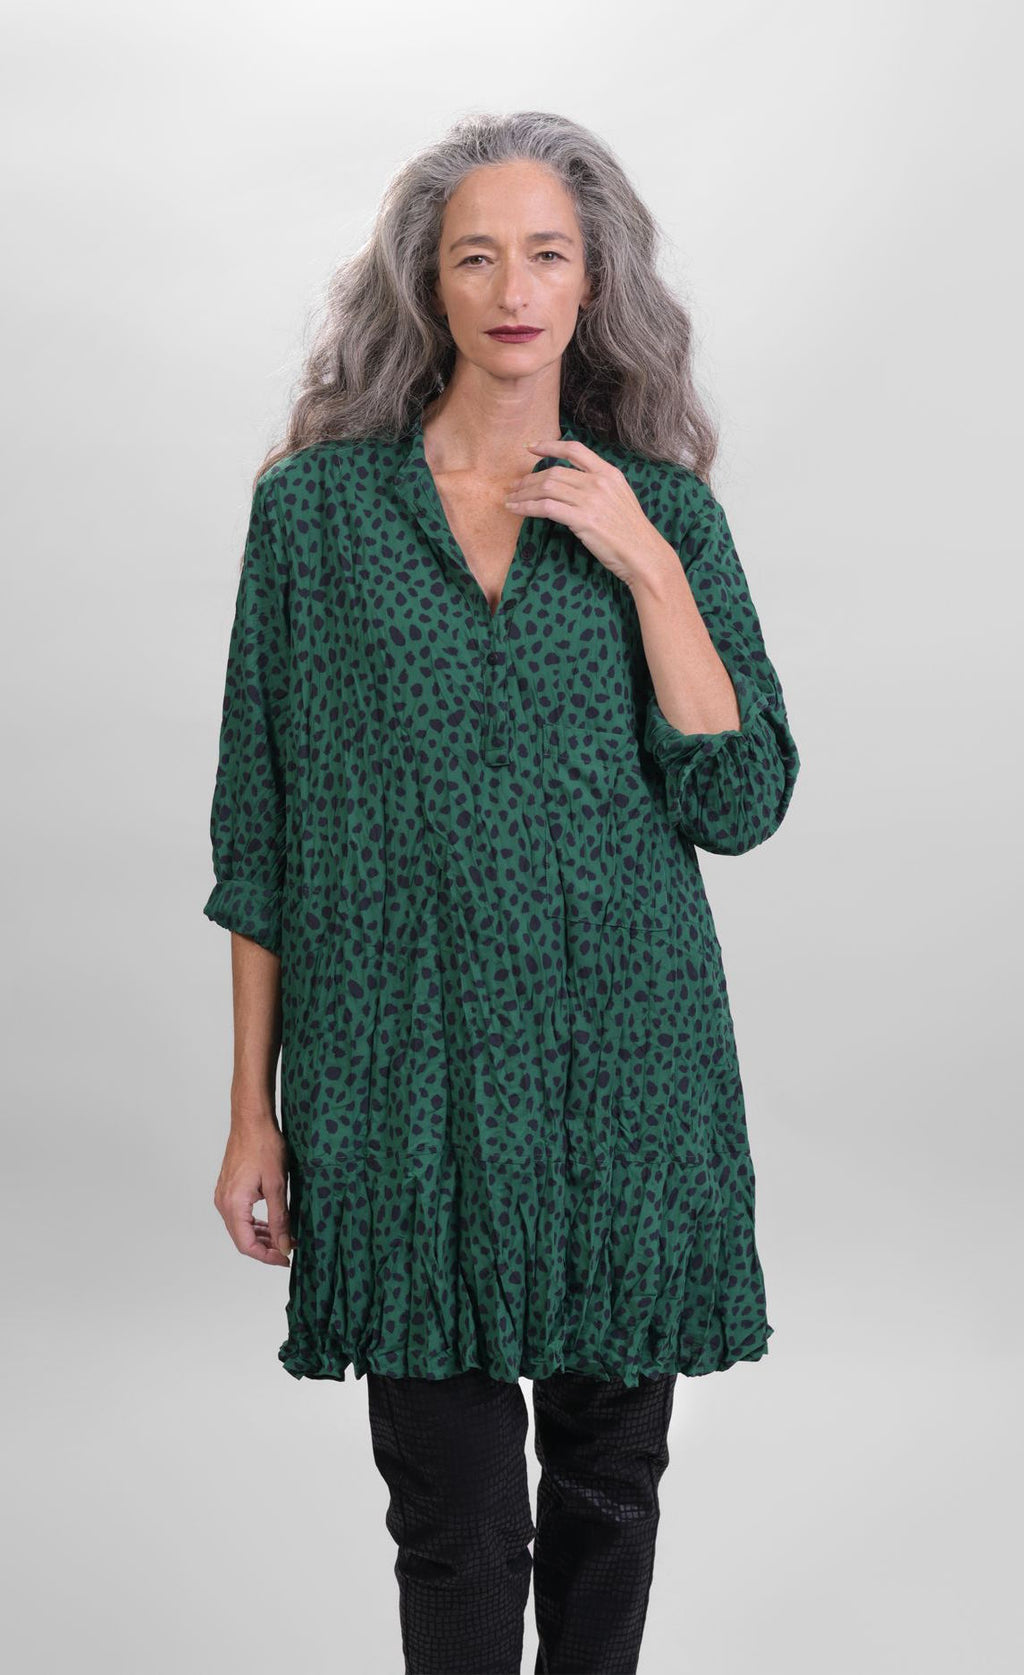 Front top half view of a woman wearing the alembika pine spot top. This top is green with black cheetah print. The top has a 3/4 button down front and long sleeves.